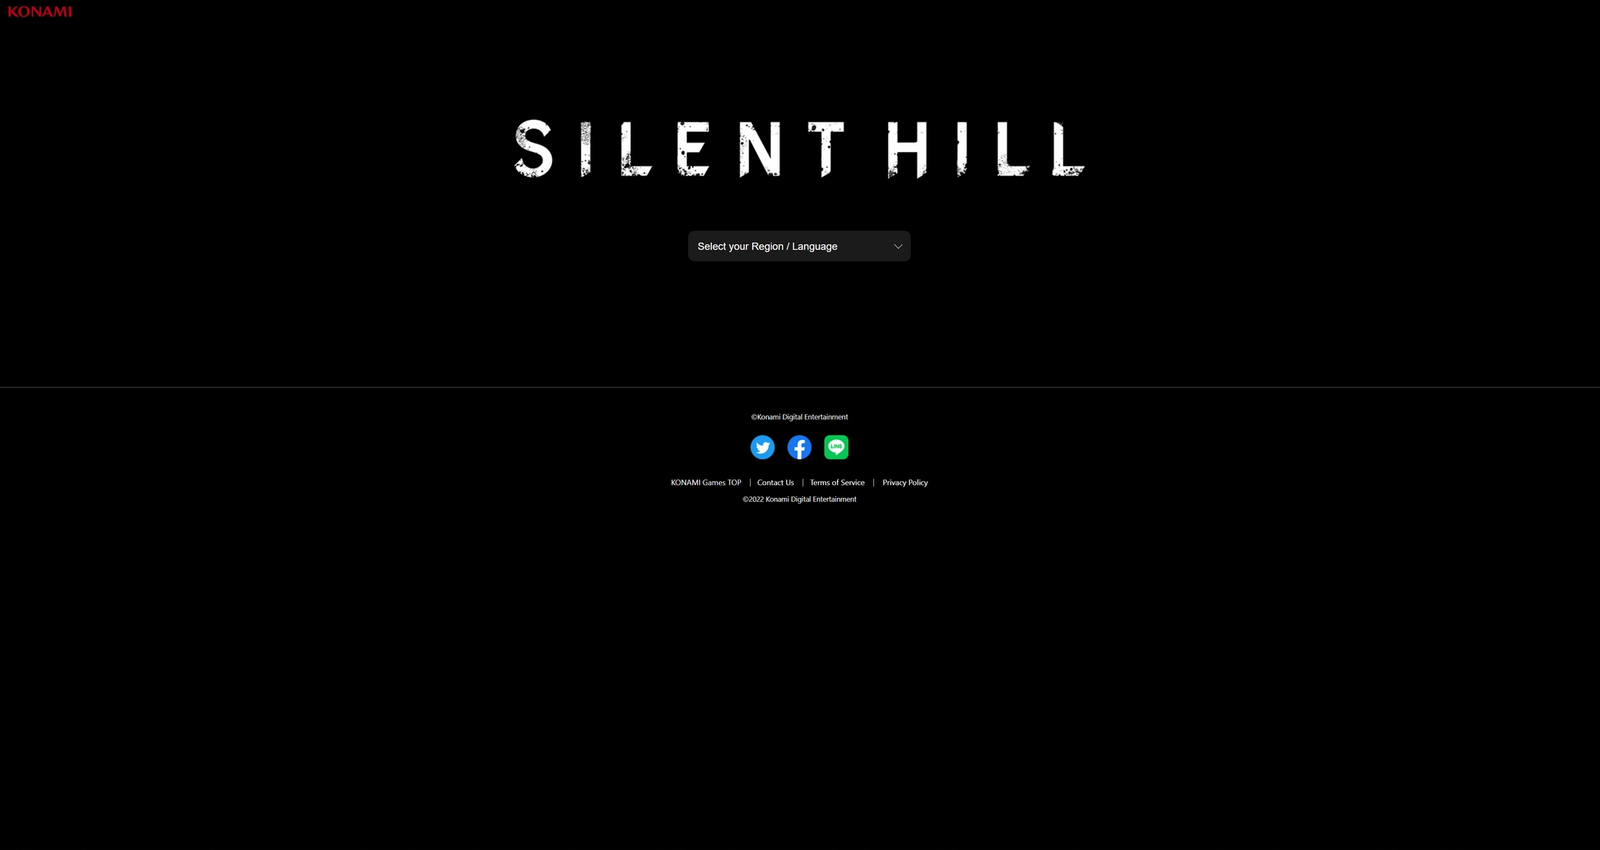 The website where the Silent Hill transmission will take place.